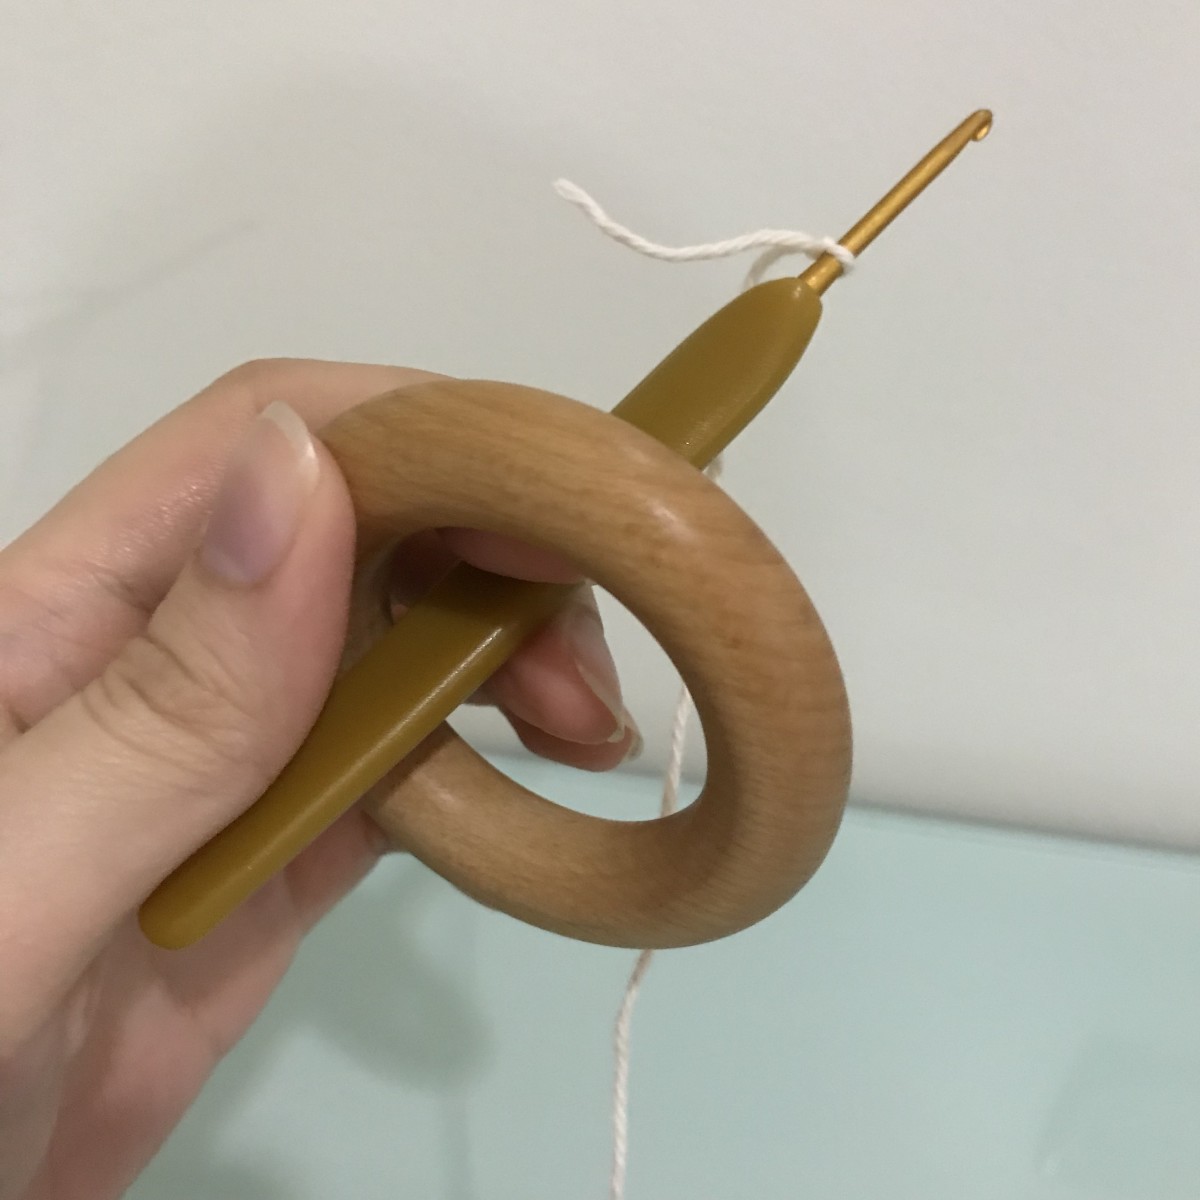 After making the slip knot, insert the hook through the ring from the back so the working yarn is at the back of the ring.